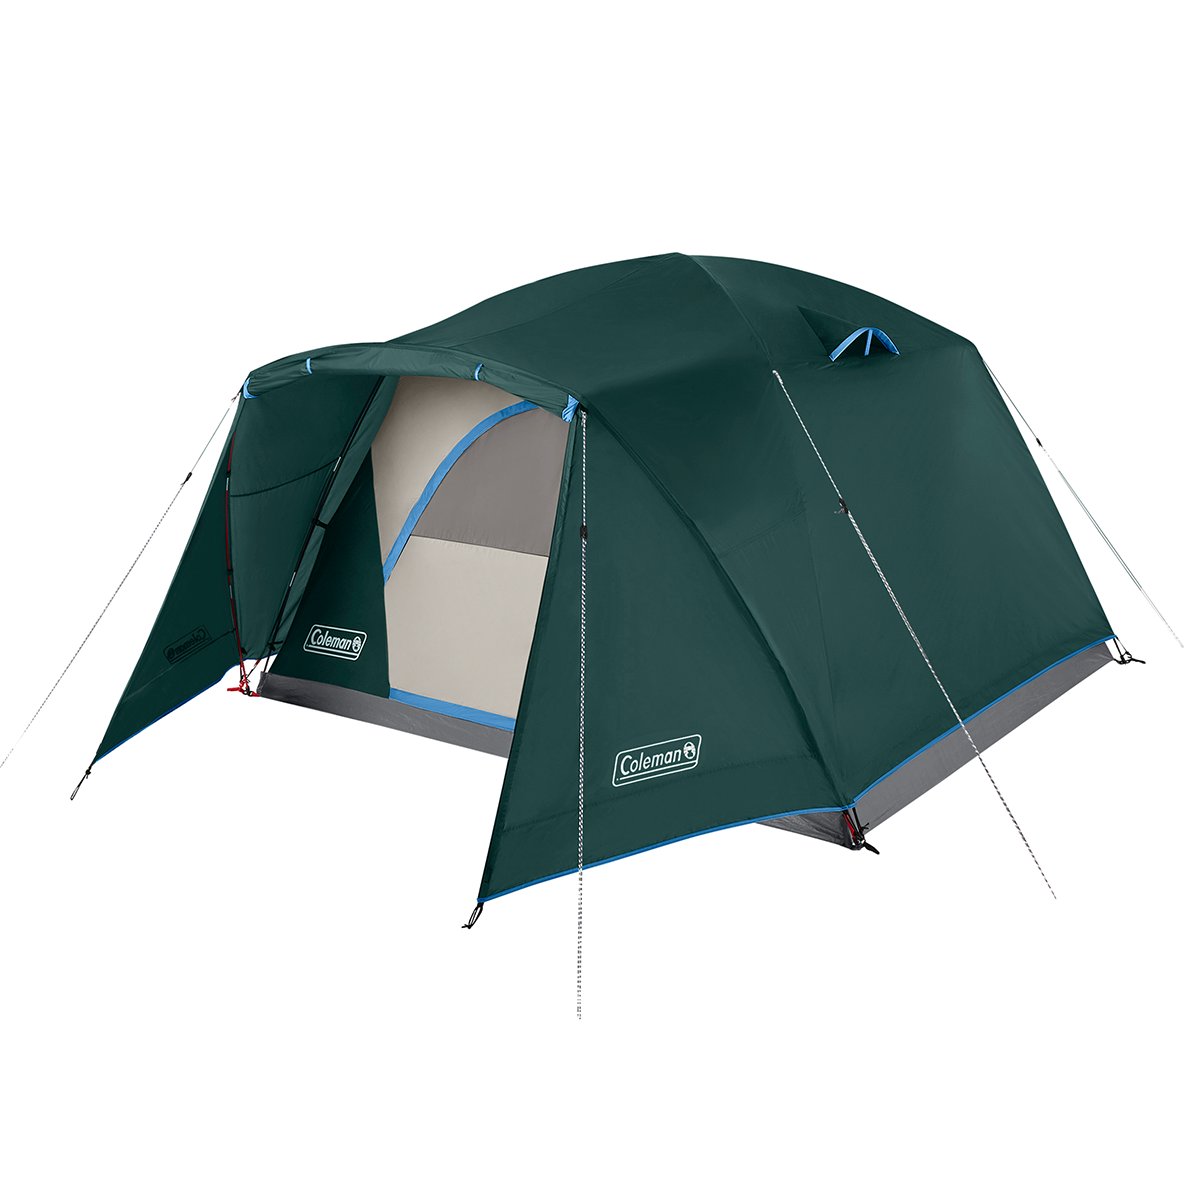 Skydome™ 6-Person Camping Tent with Full-Fly Vestibule, Evergreen 